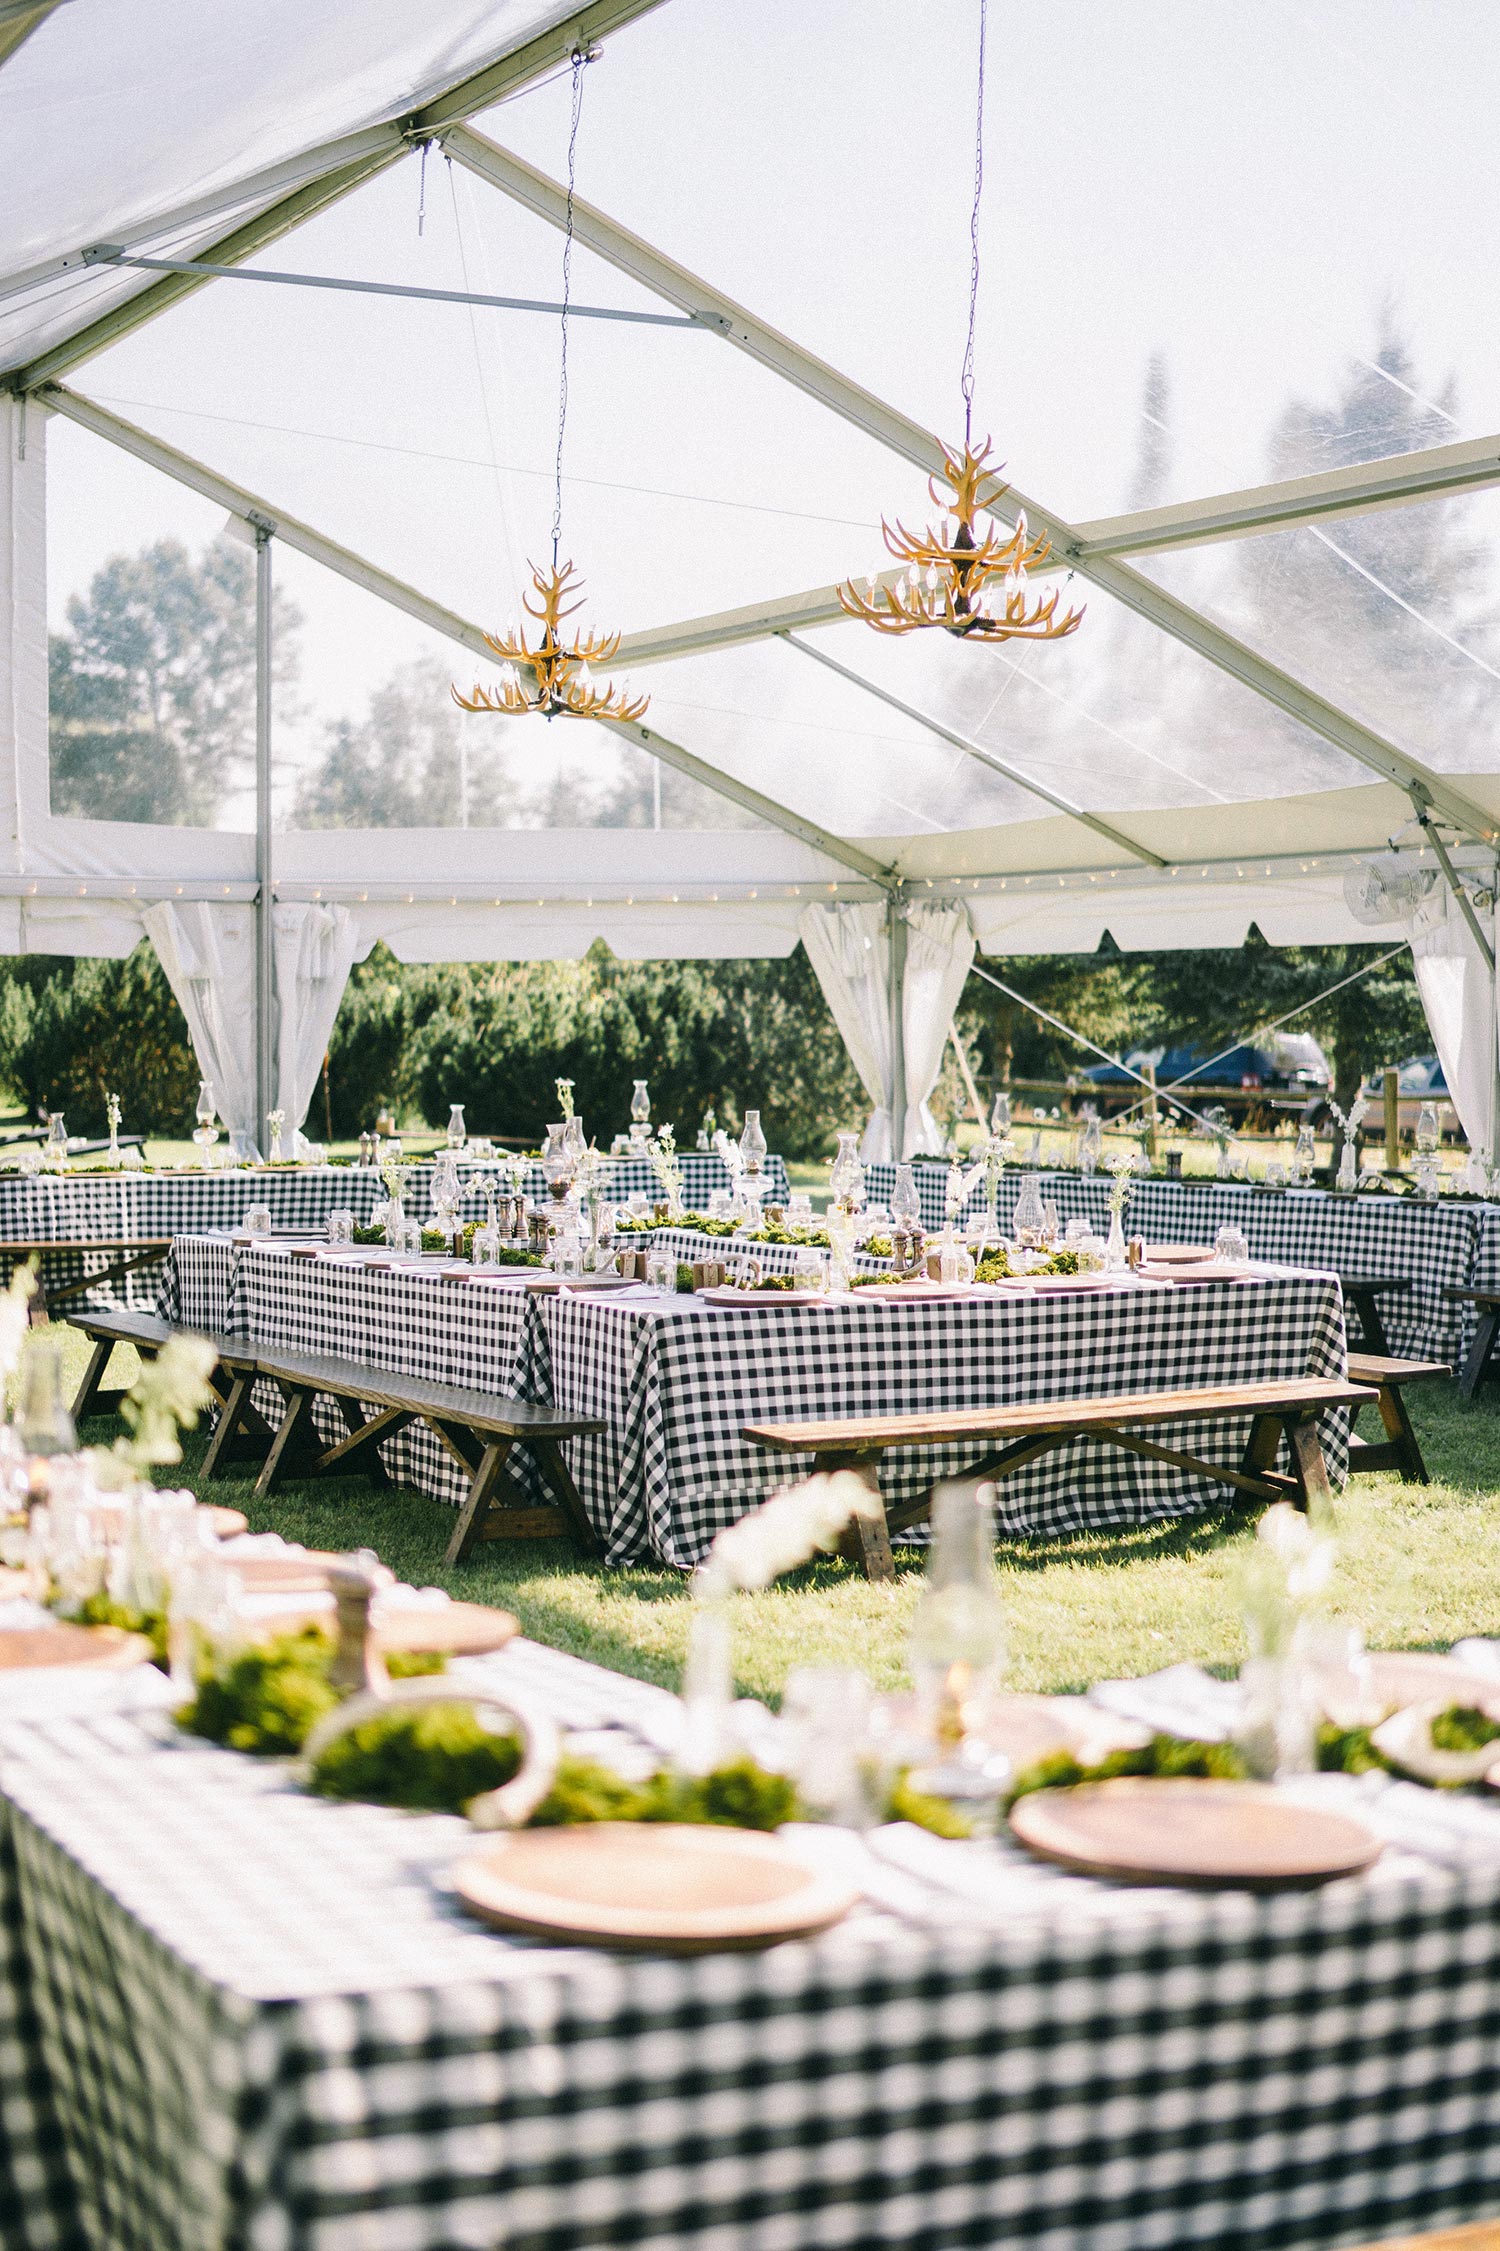 ranch style rehearsal dinner in clear tent